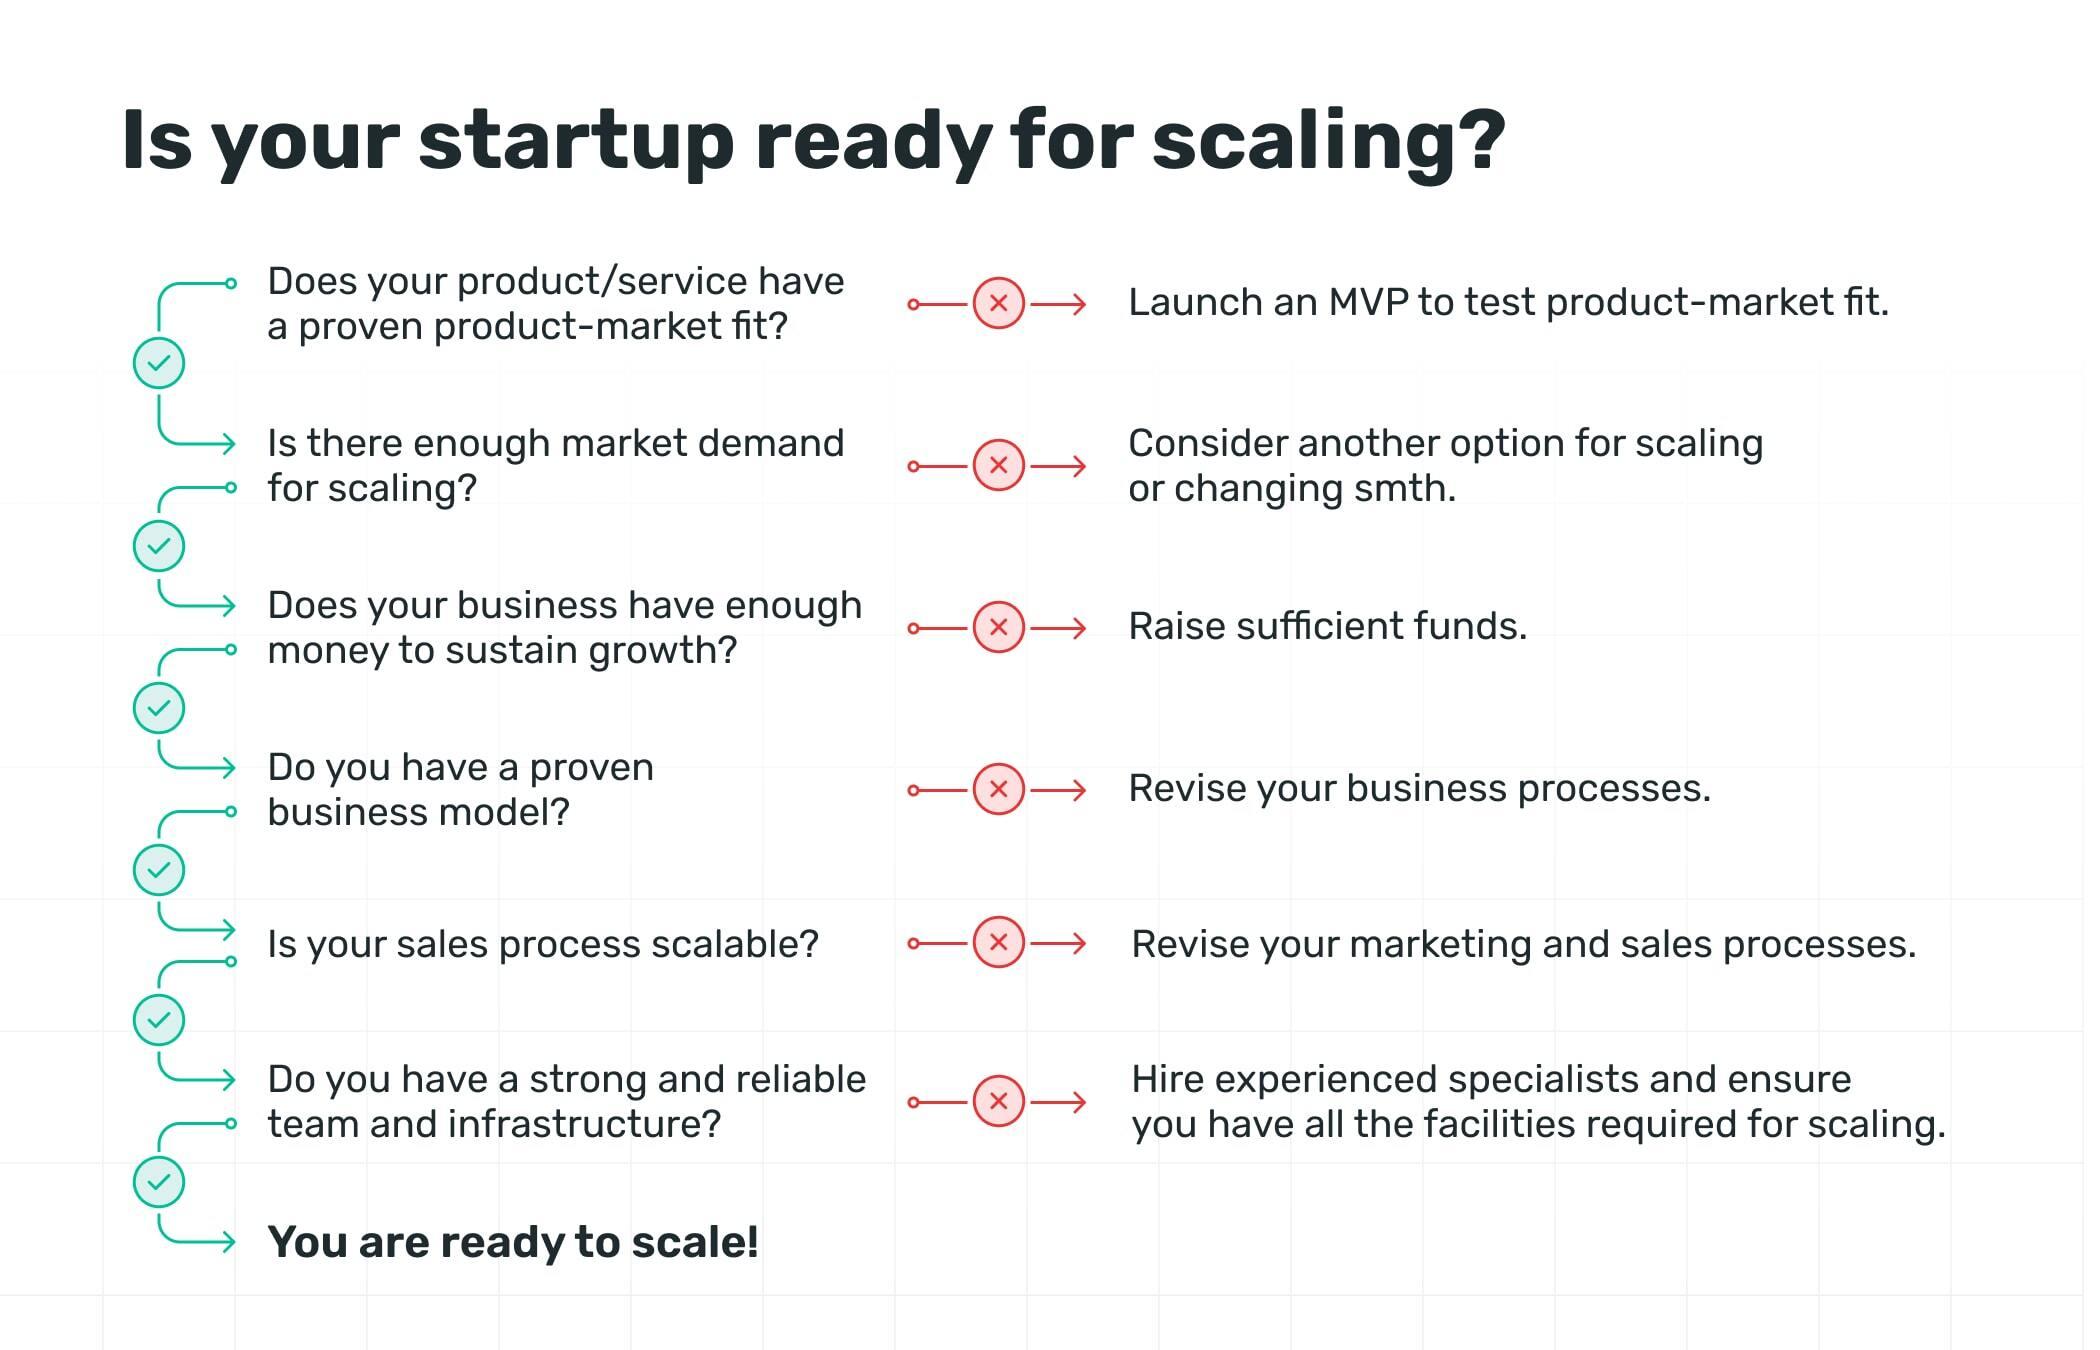 Is your startup ready for scaling?